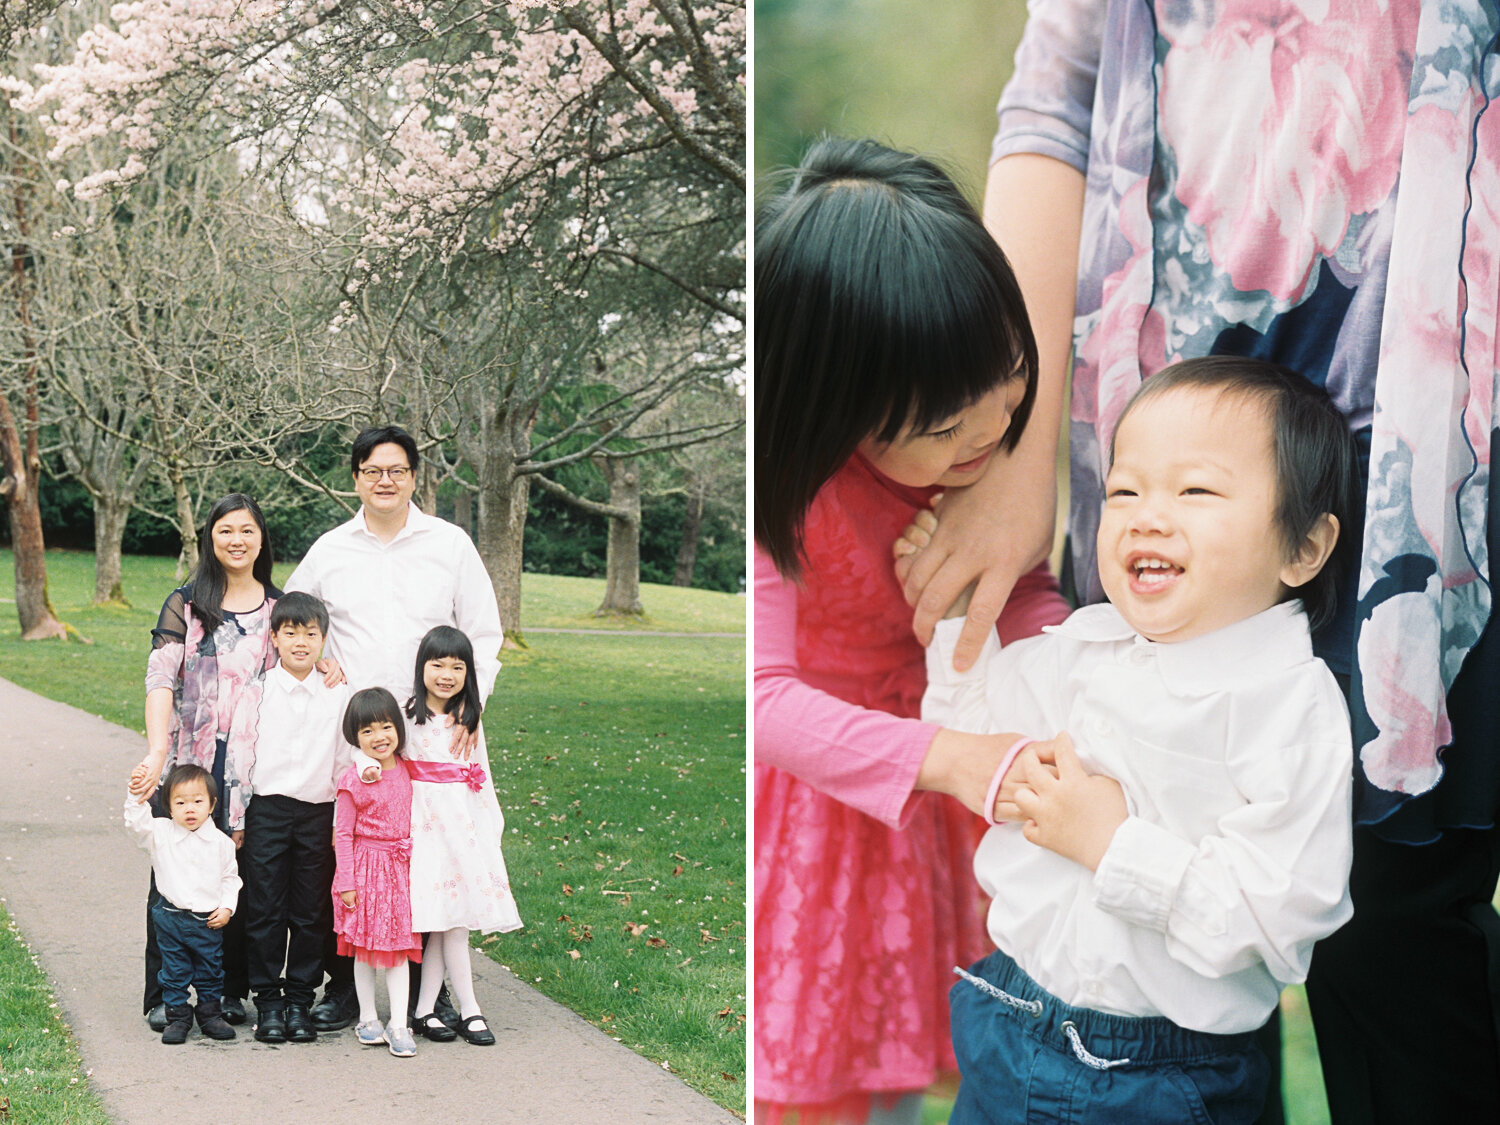 Victoria BC spring film family photography 001.JPG